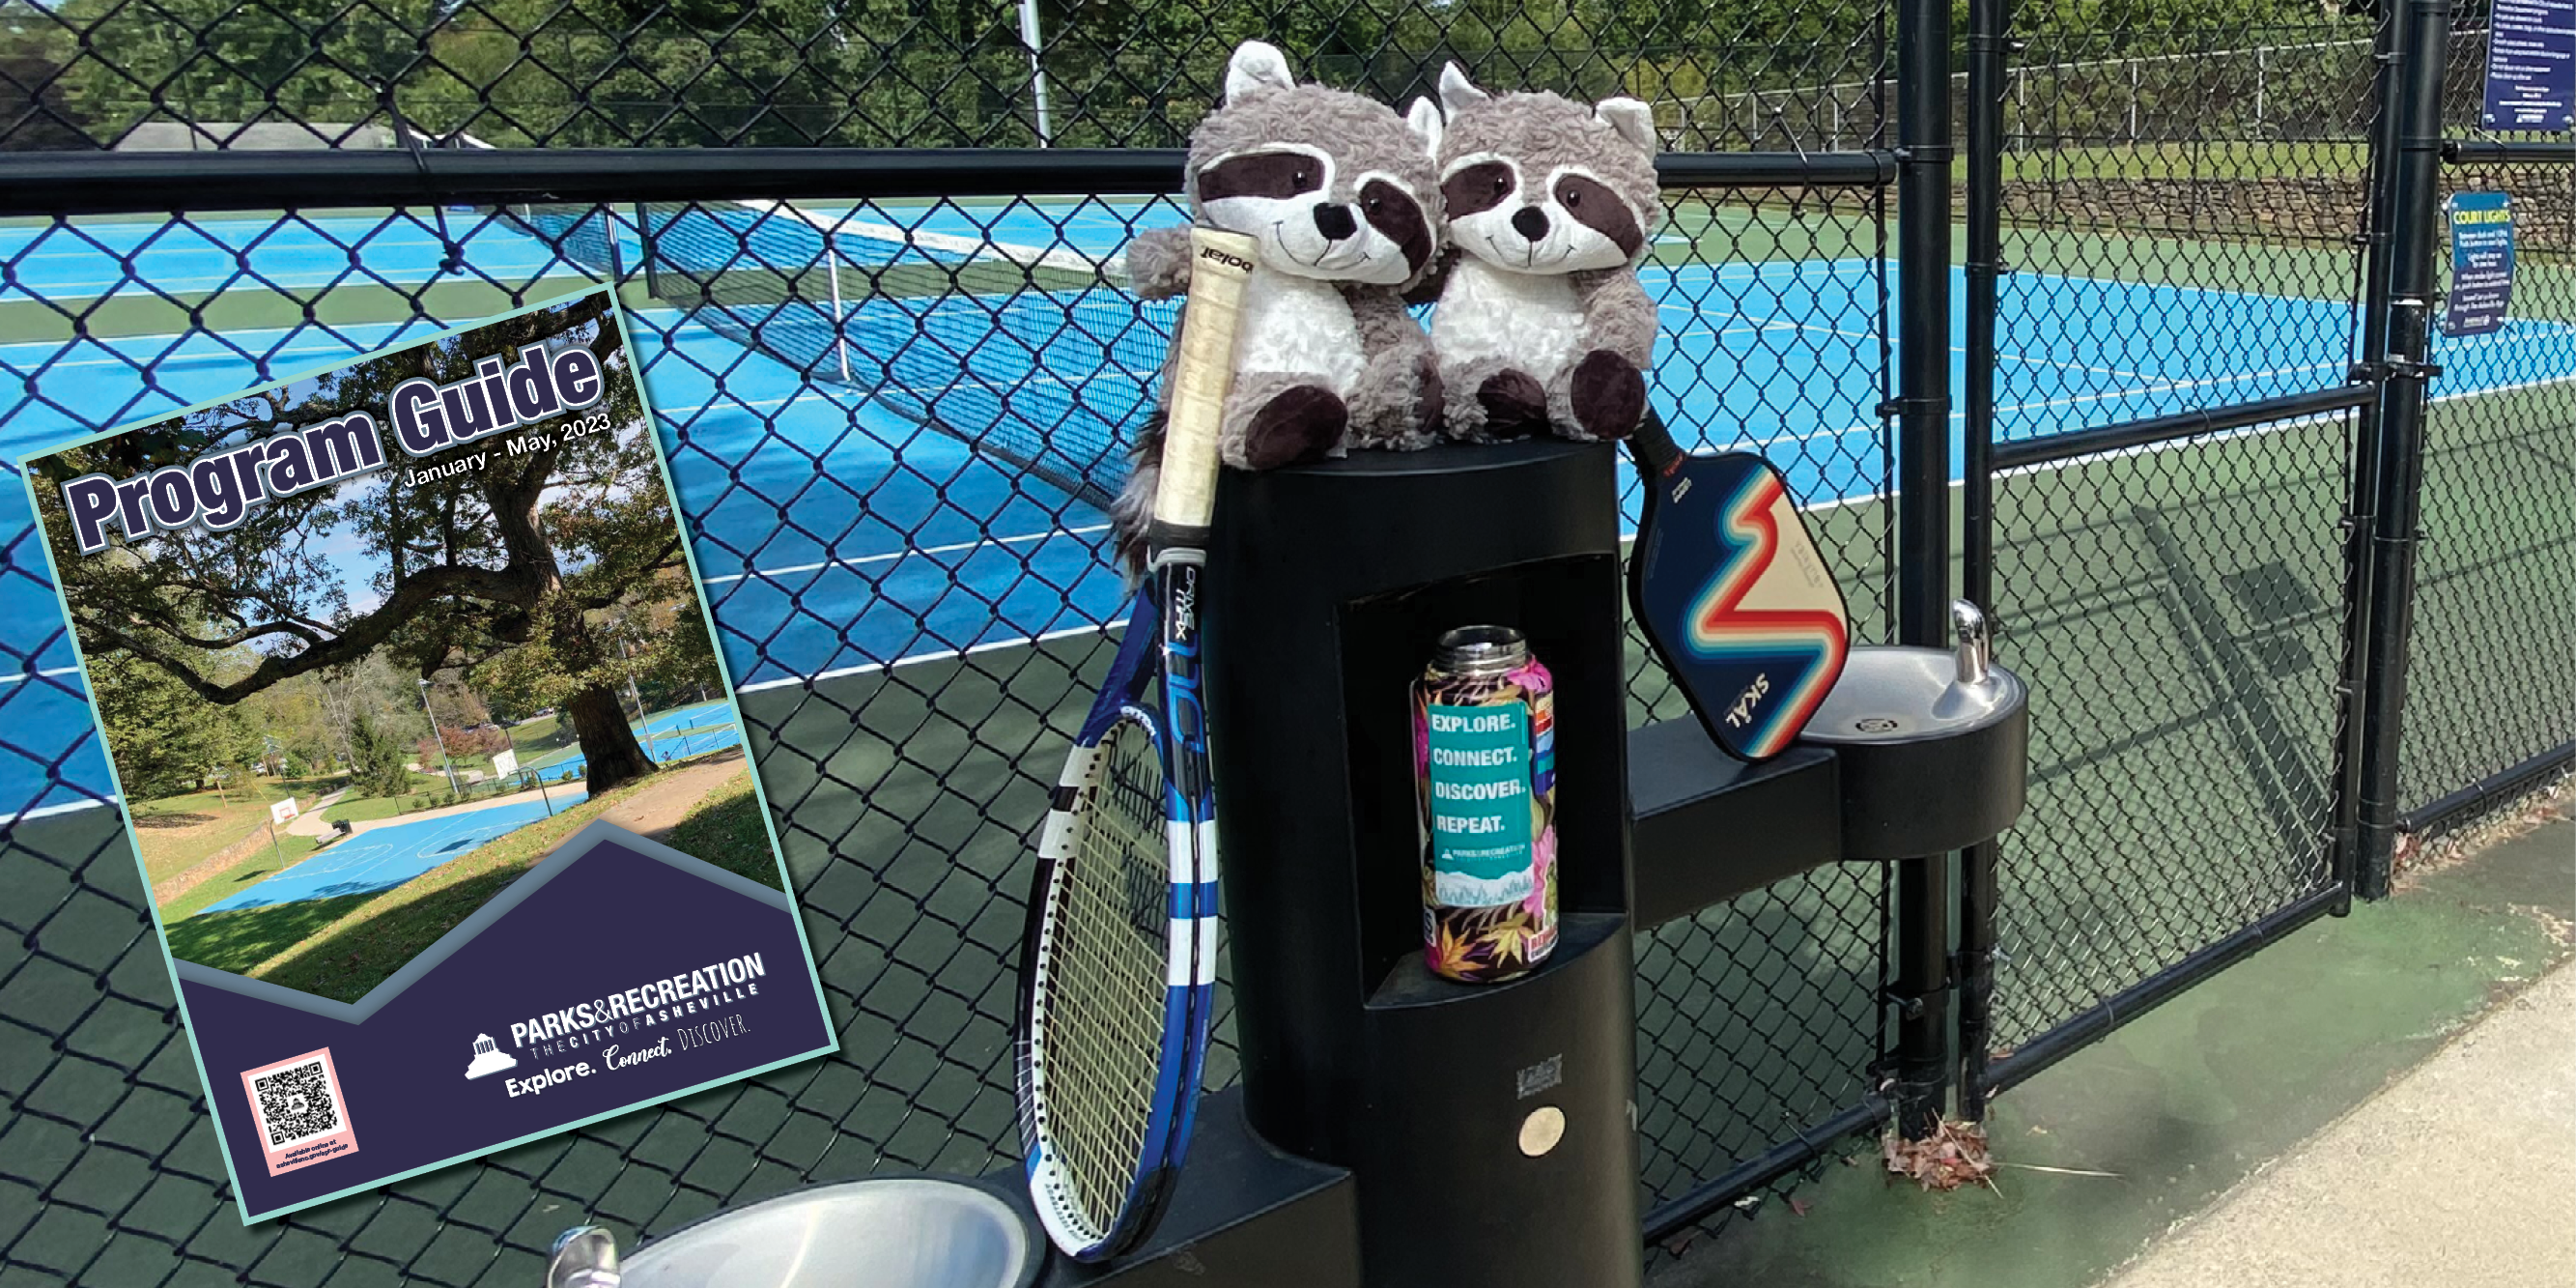 Stuffed animal raccoons with tennis racquet and pickleball paddle on water fountain with program guide cover inset